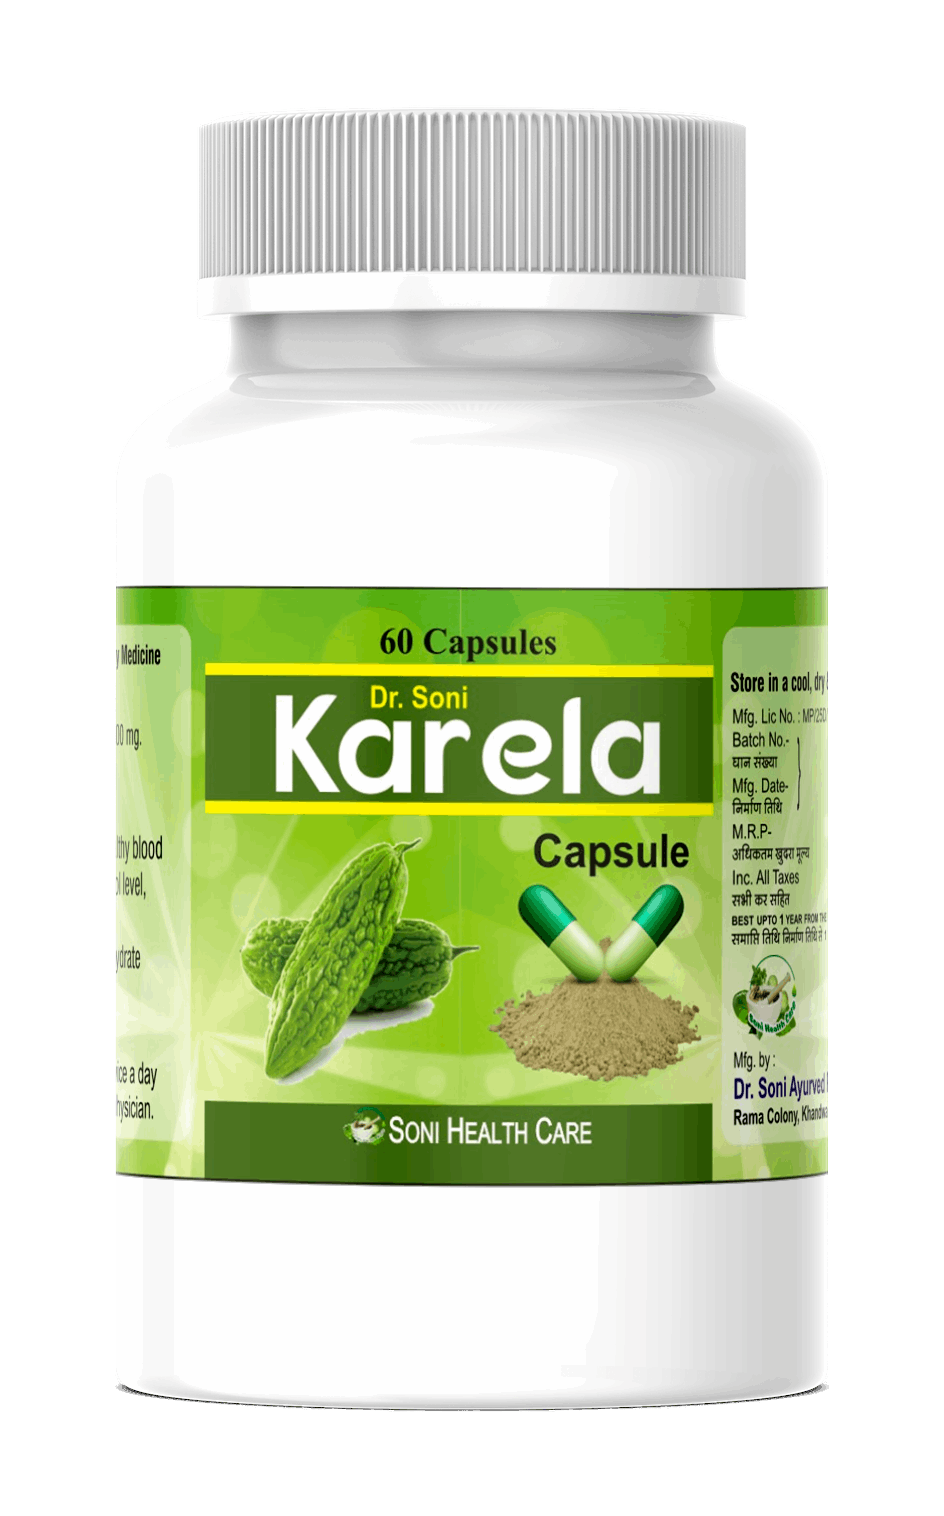 Dr. Soni Karela /Bitter Gourd Extract Capsule for Control Sugar Level,Blood Purification & Healthy Metabolism (60 Capsule X 500 mg),Sugar levels,sugar level,Soni Karela,normal sugar levels,normal blood sugar levels,Karela,high blood sugar levels,diabetic blood sugar levels,Blood sugar levels,Bitter Gourd